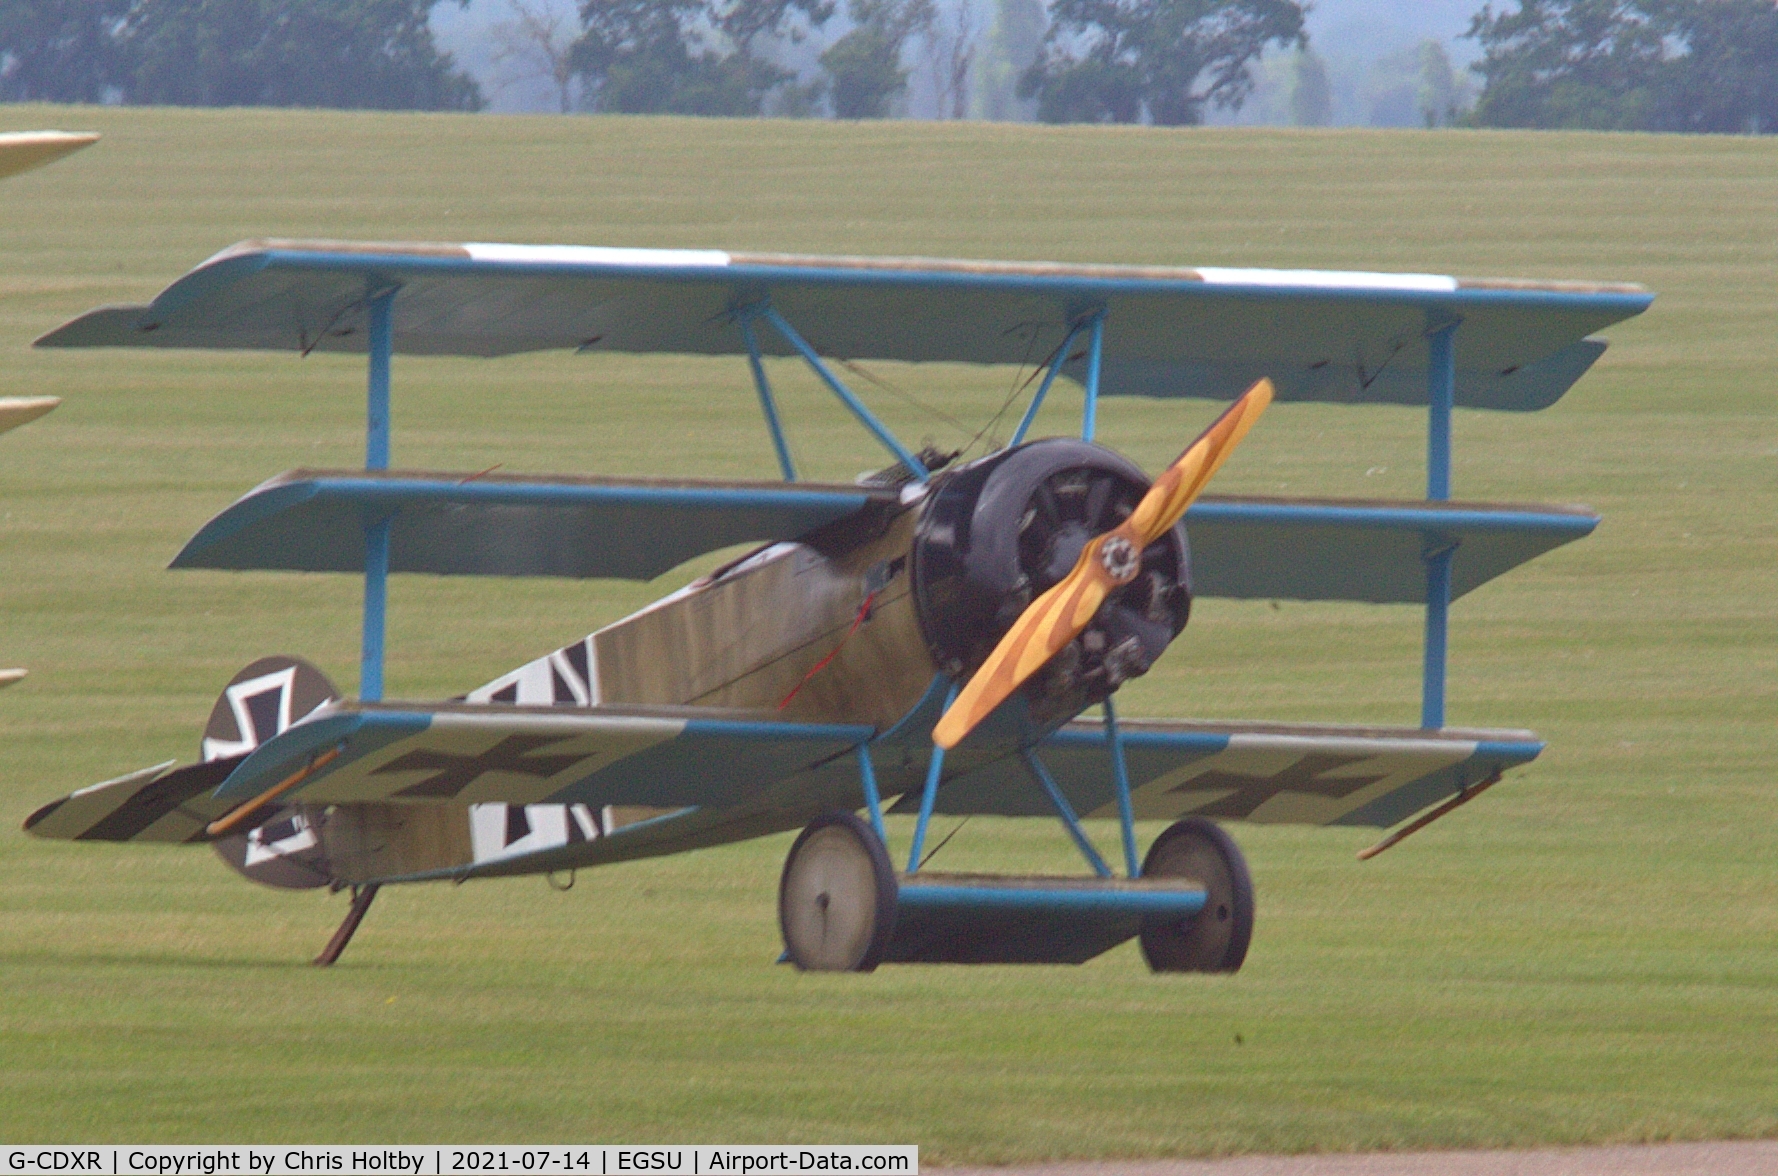 G-CDXR, 2006 Fokker Dr.1 Triplane Replica C/N PFA 238-14043, Ready for dogfight simulations over Duxford Airfield with 3 other members of the 'Great War Display Team'